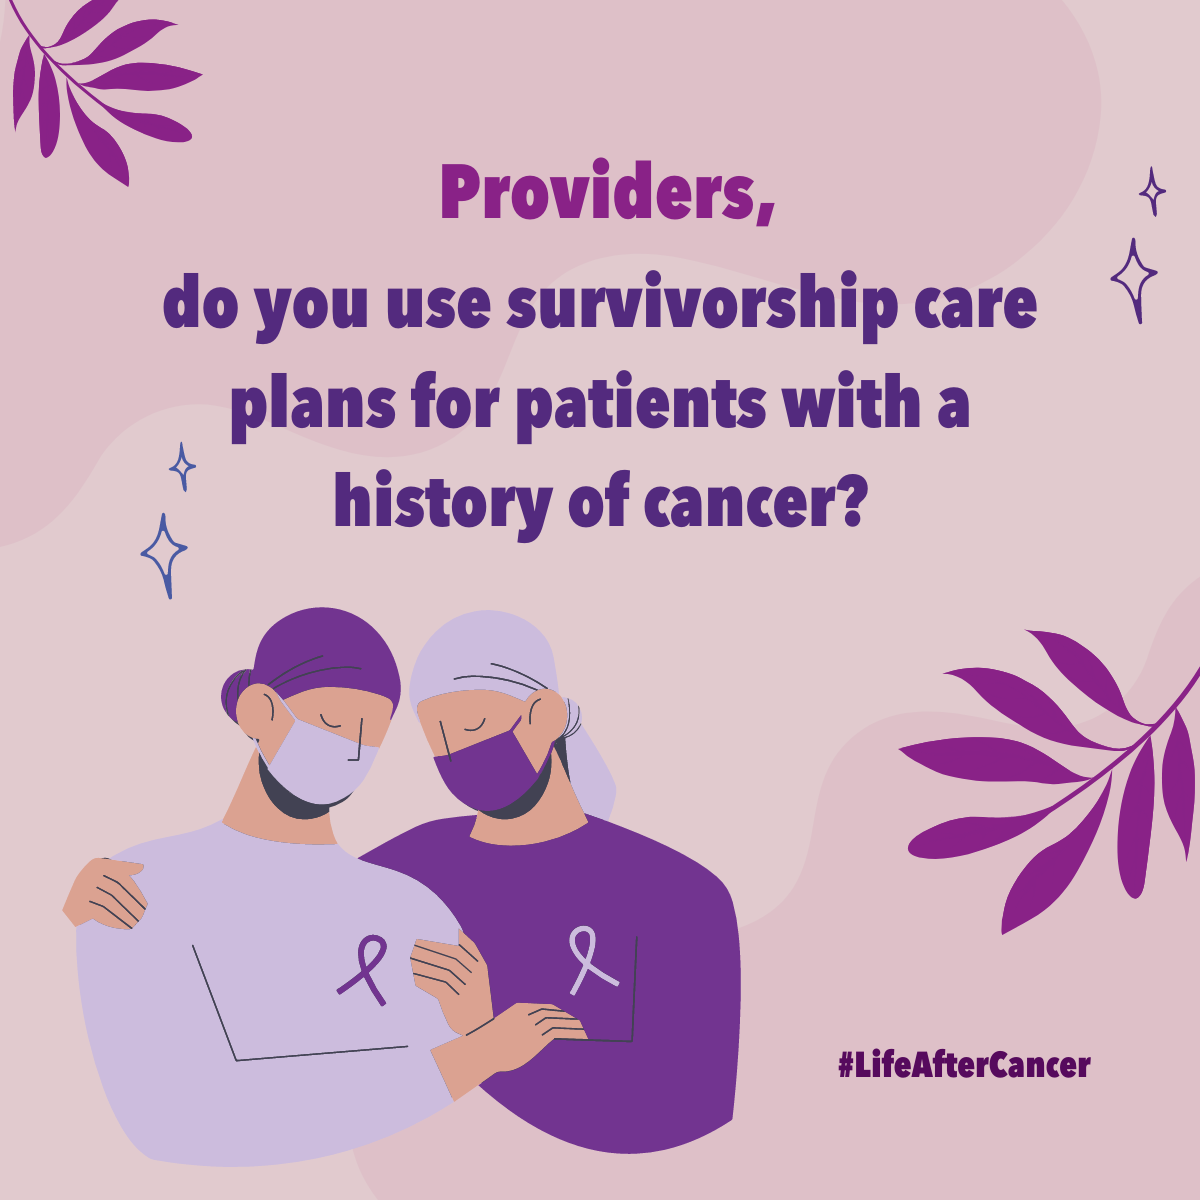 Image of cancer care providers supporting each other. Background is pink with purple foliage. Text reads: Providers, do you use survivorship care plans for patients with a history of cancer?